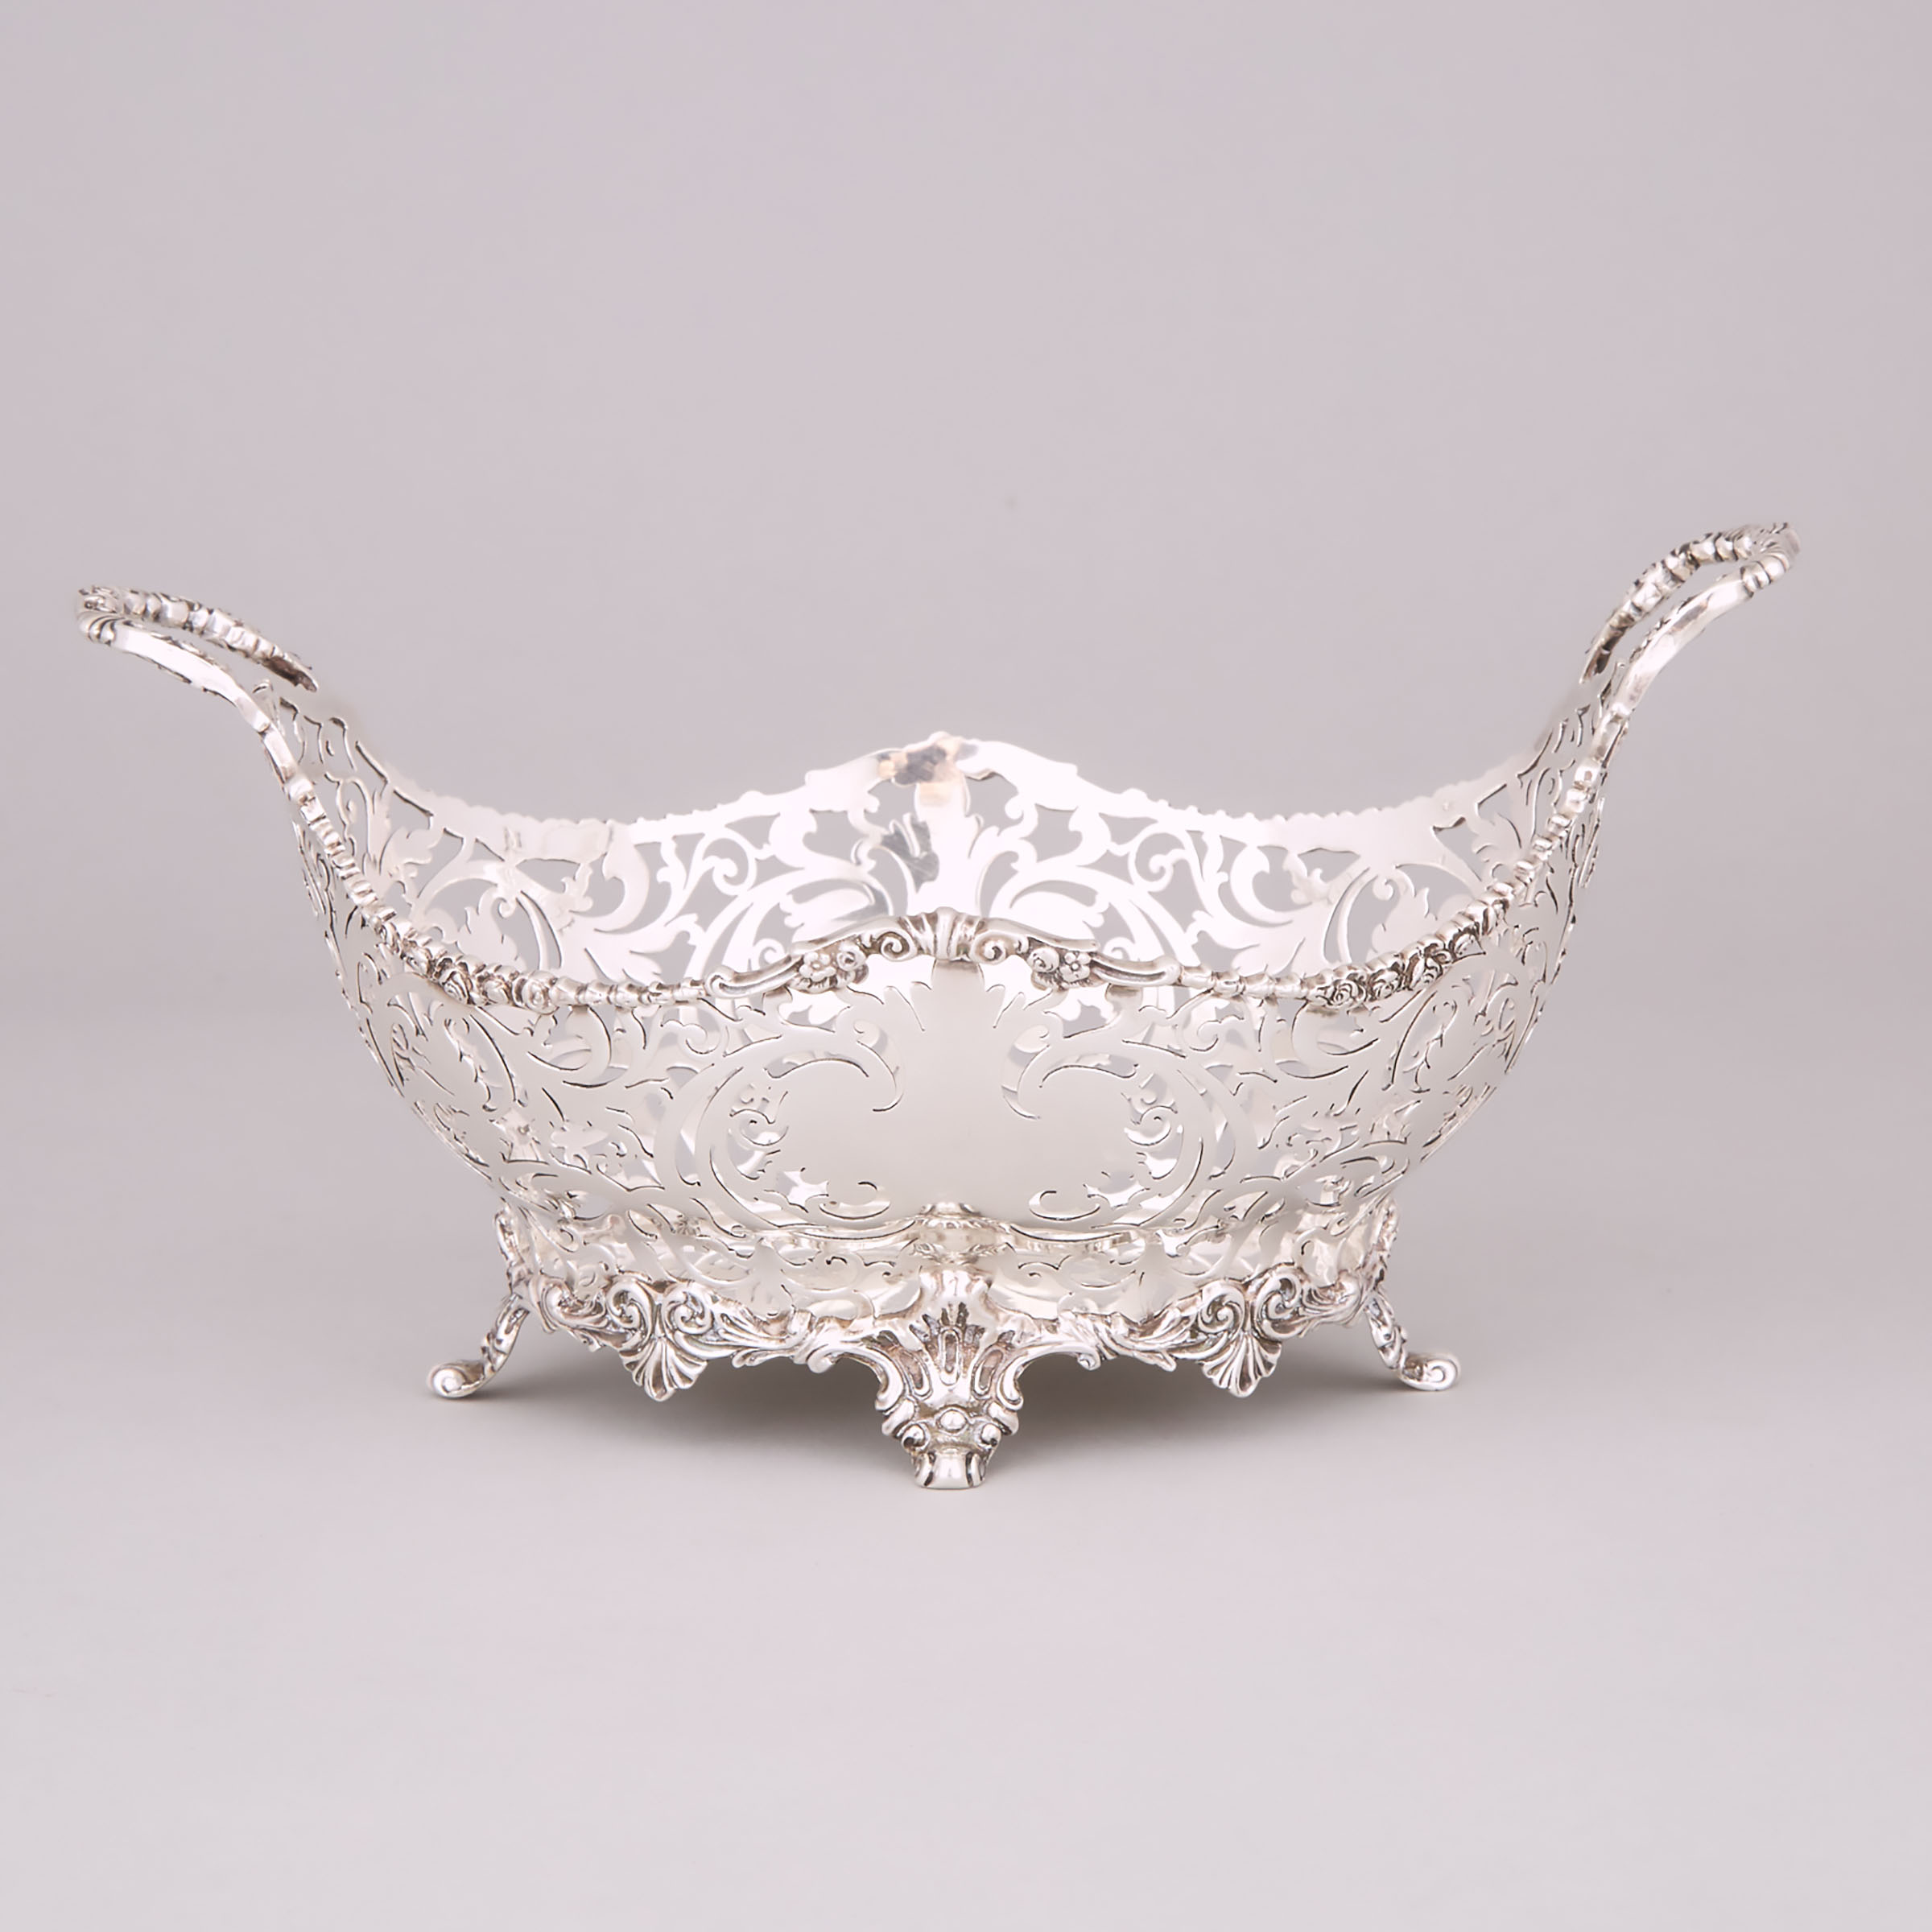 English Silver Pierced Oval Two-Handled Basket, for Henry Birks, Josiah Williams & Co., London, 1919